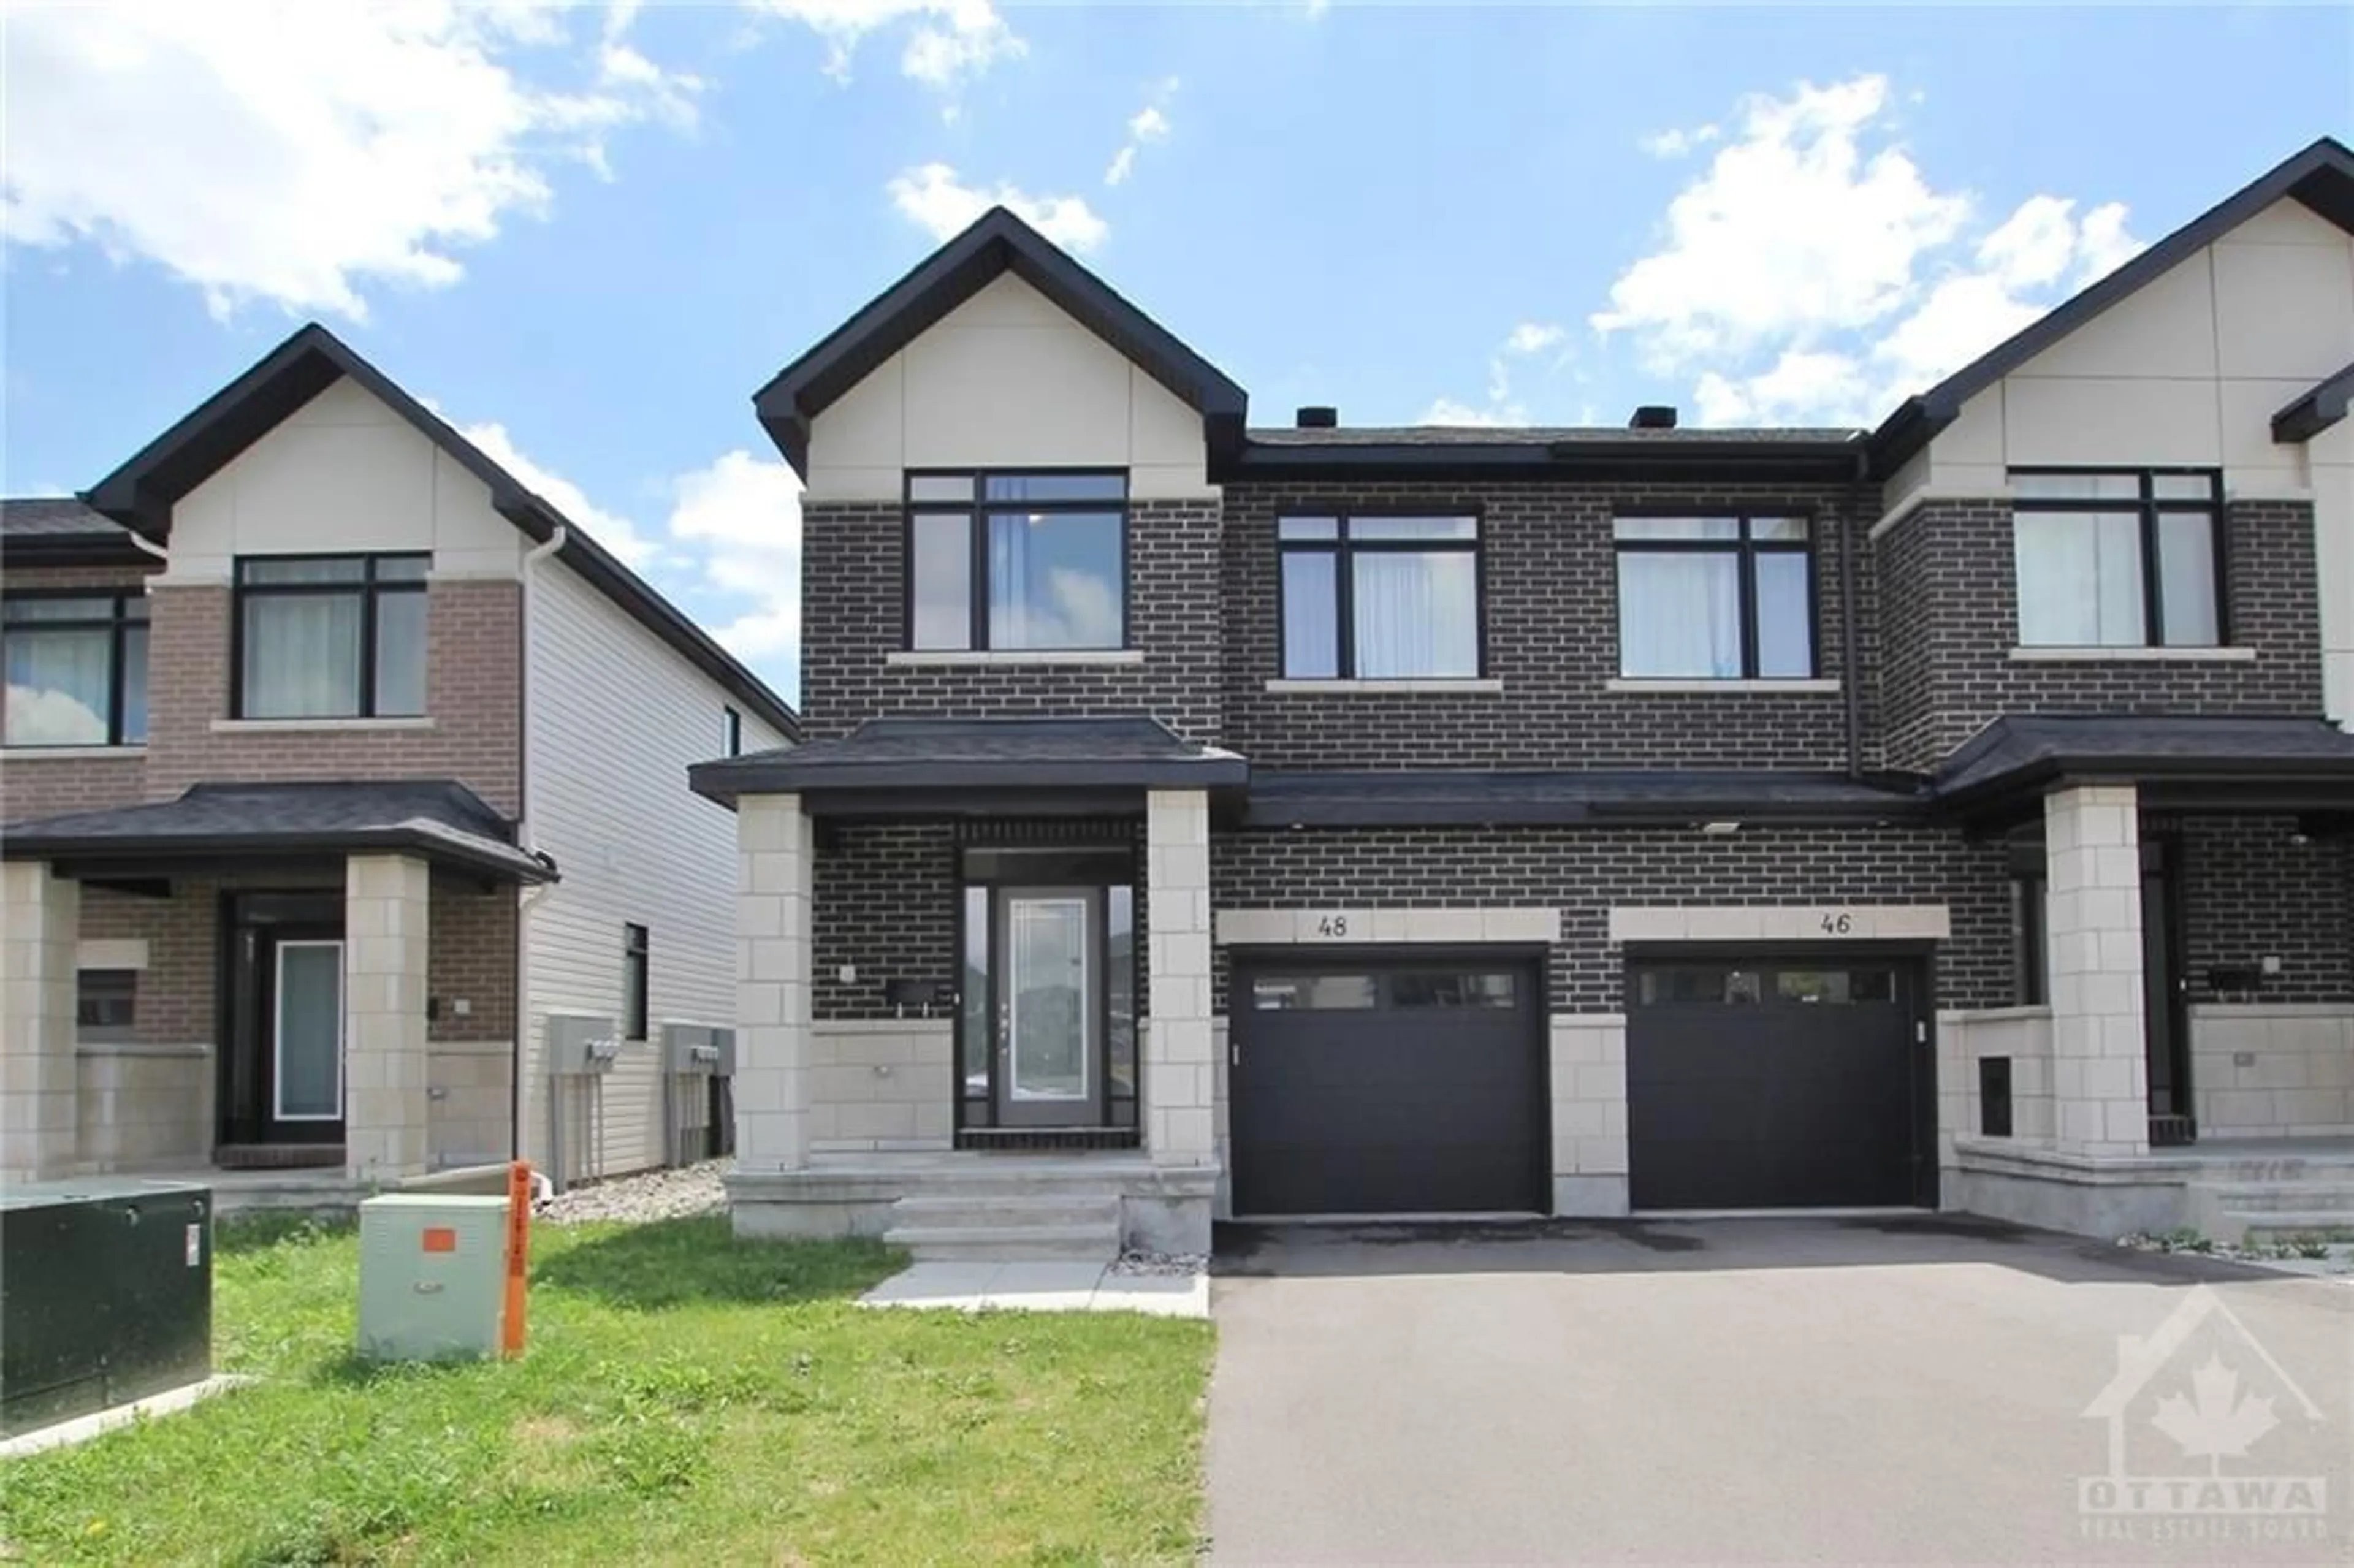 Frontside or backside of a home for 48 OVERBERG Way, Ottawa Ontario K2S 2S9